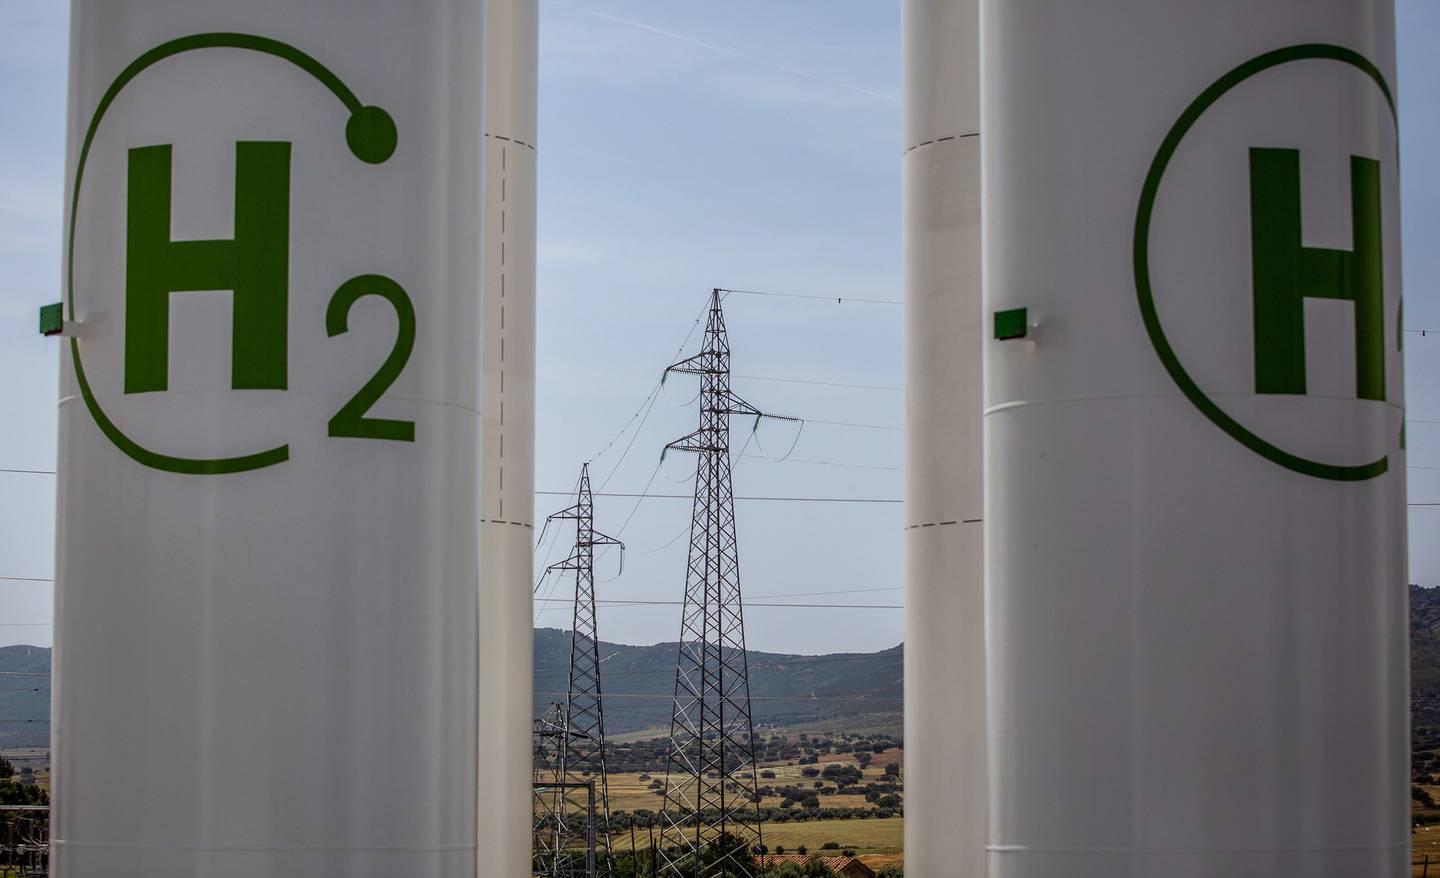 The UAE plans to be a global leader in low-carbon hydrogen by 2030. Pictured here is Europe's largest green hydrogen plant in Puertollano, Spain. Bloomberg